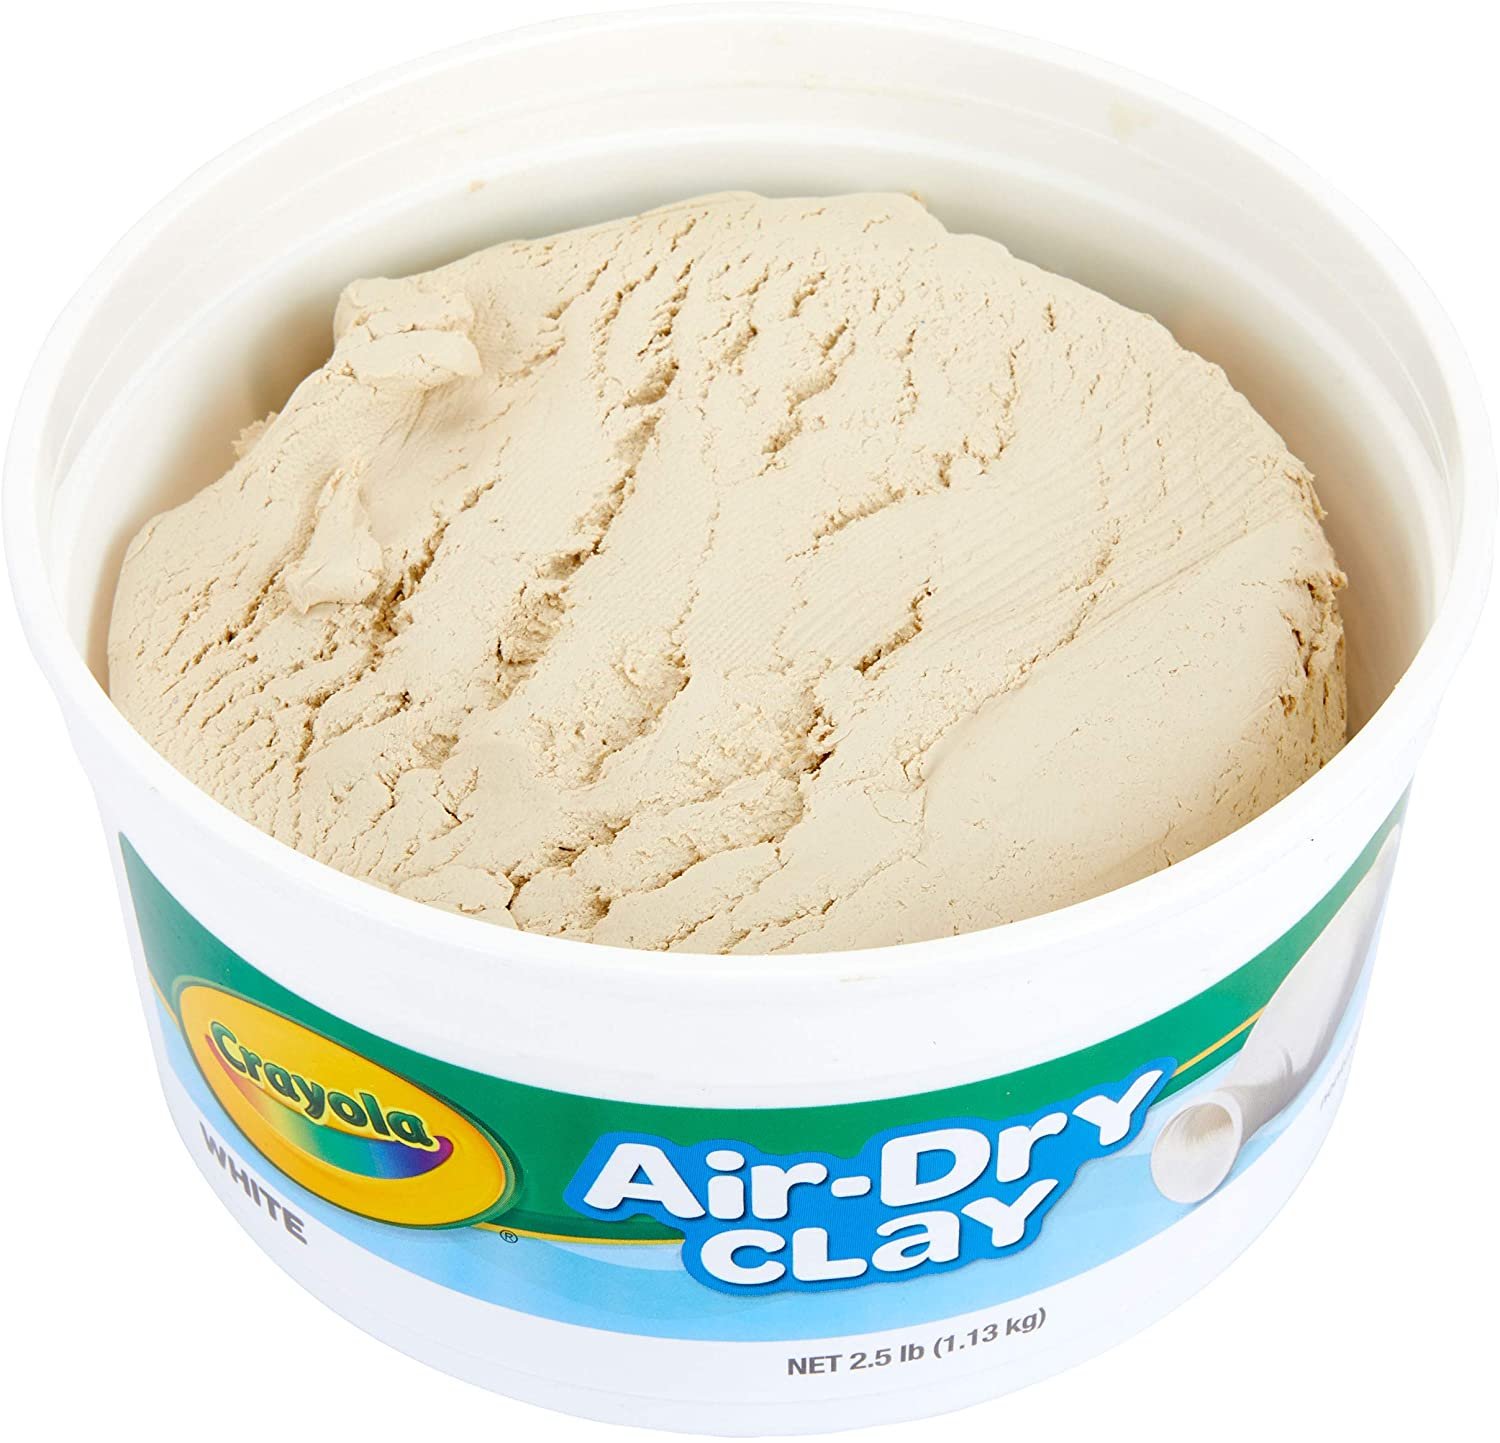 Crayola Air-Dry Clay, White, 2.5 Lb Resealable Bucket - image 4 of 11